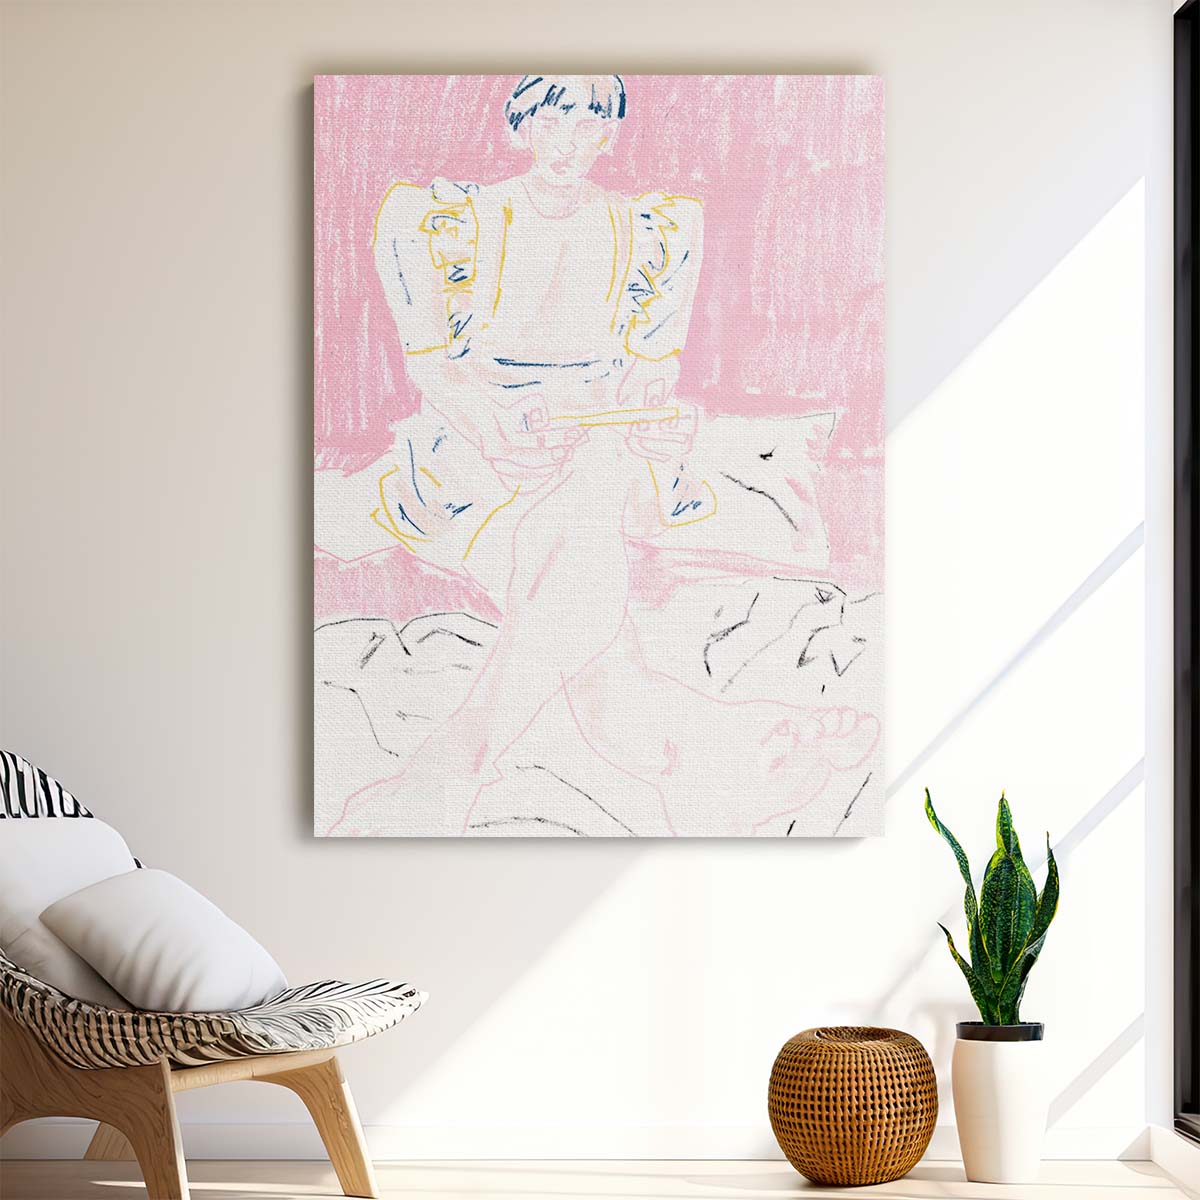 Pink Pastel Gamer Girl Portrait, Figurative Illustration by Francesco Gulina by Luxuriance Designs, made in USA